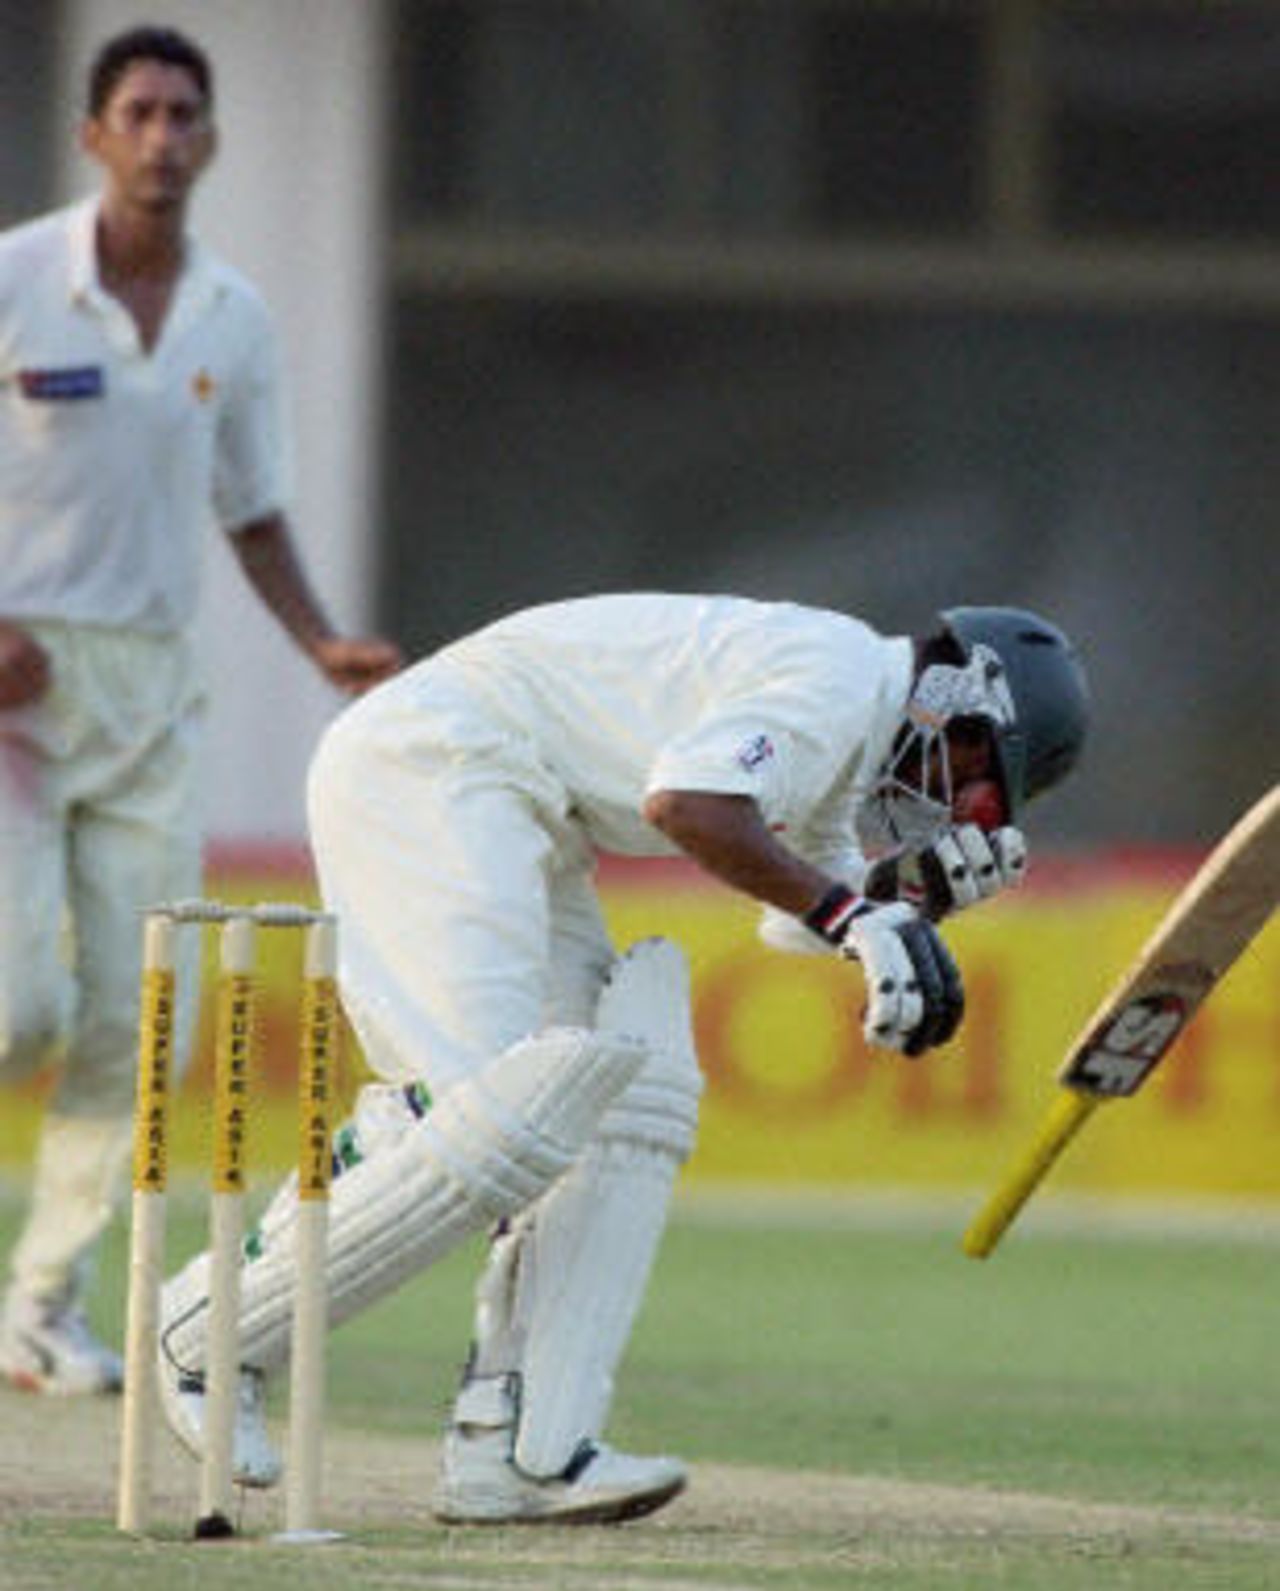 Alok Kapali fall to the ground after a Shabbir Ahmed delivery hit his face, Pakistan v Bangladesh, 3rd Test, Multan, September 4, 2003.